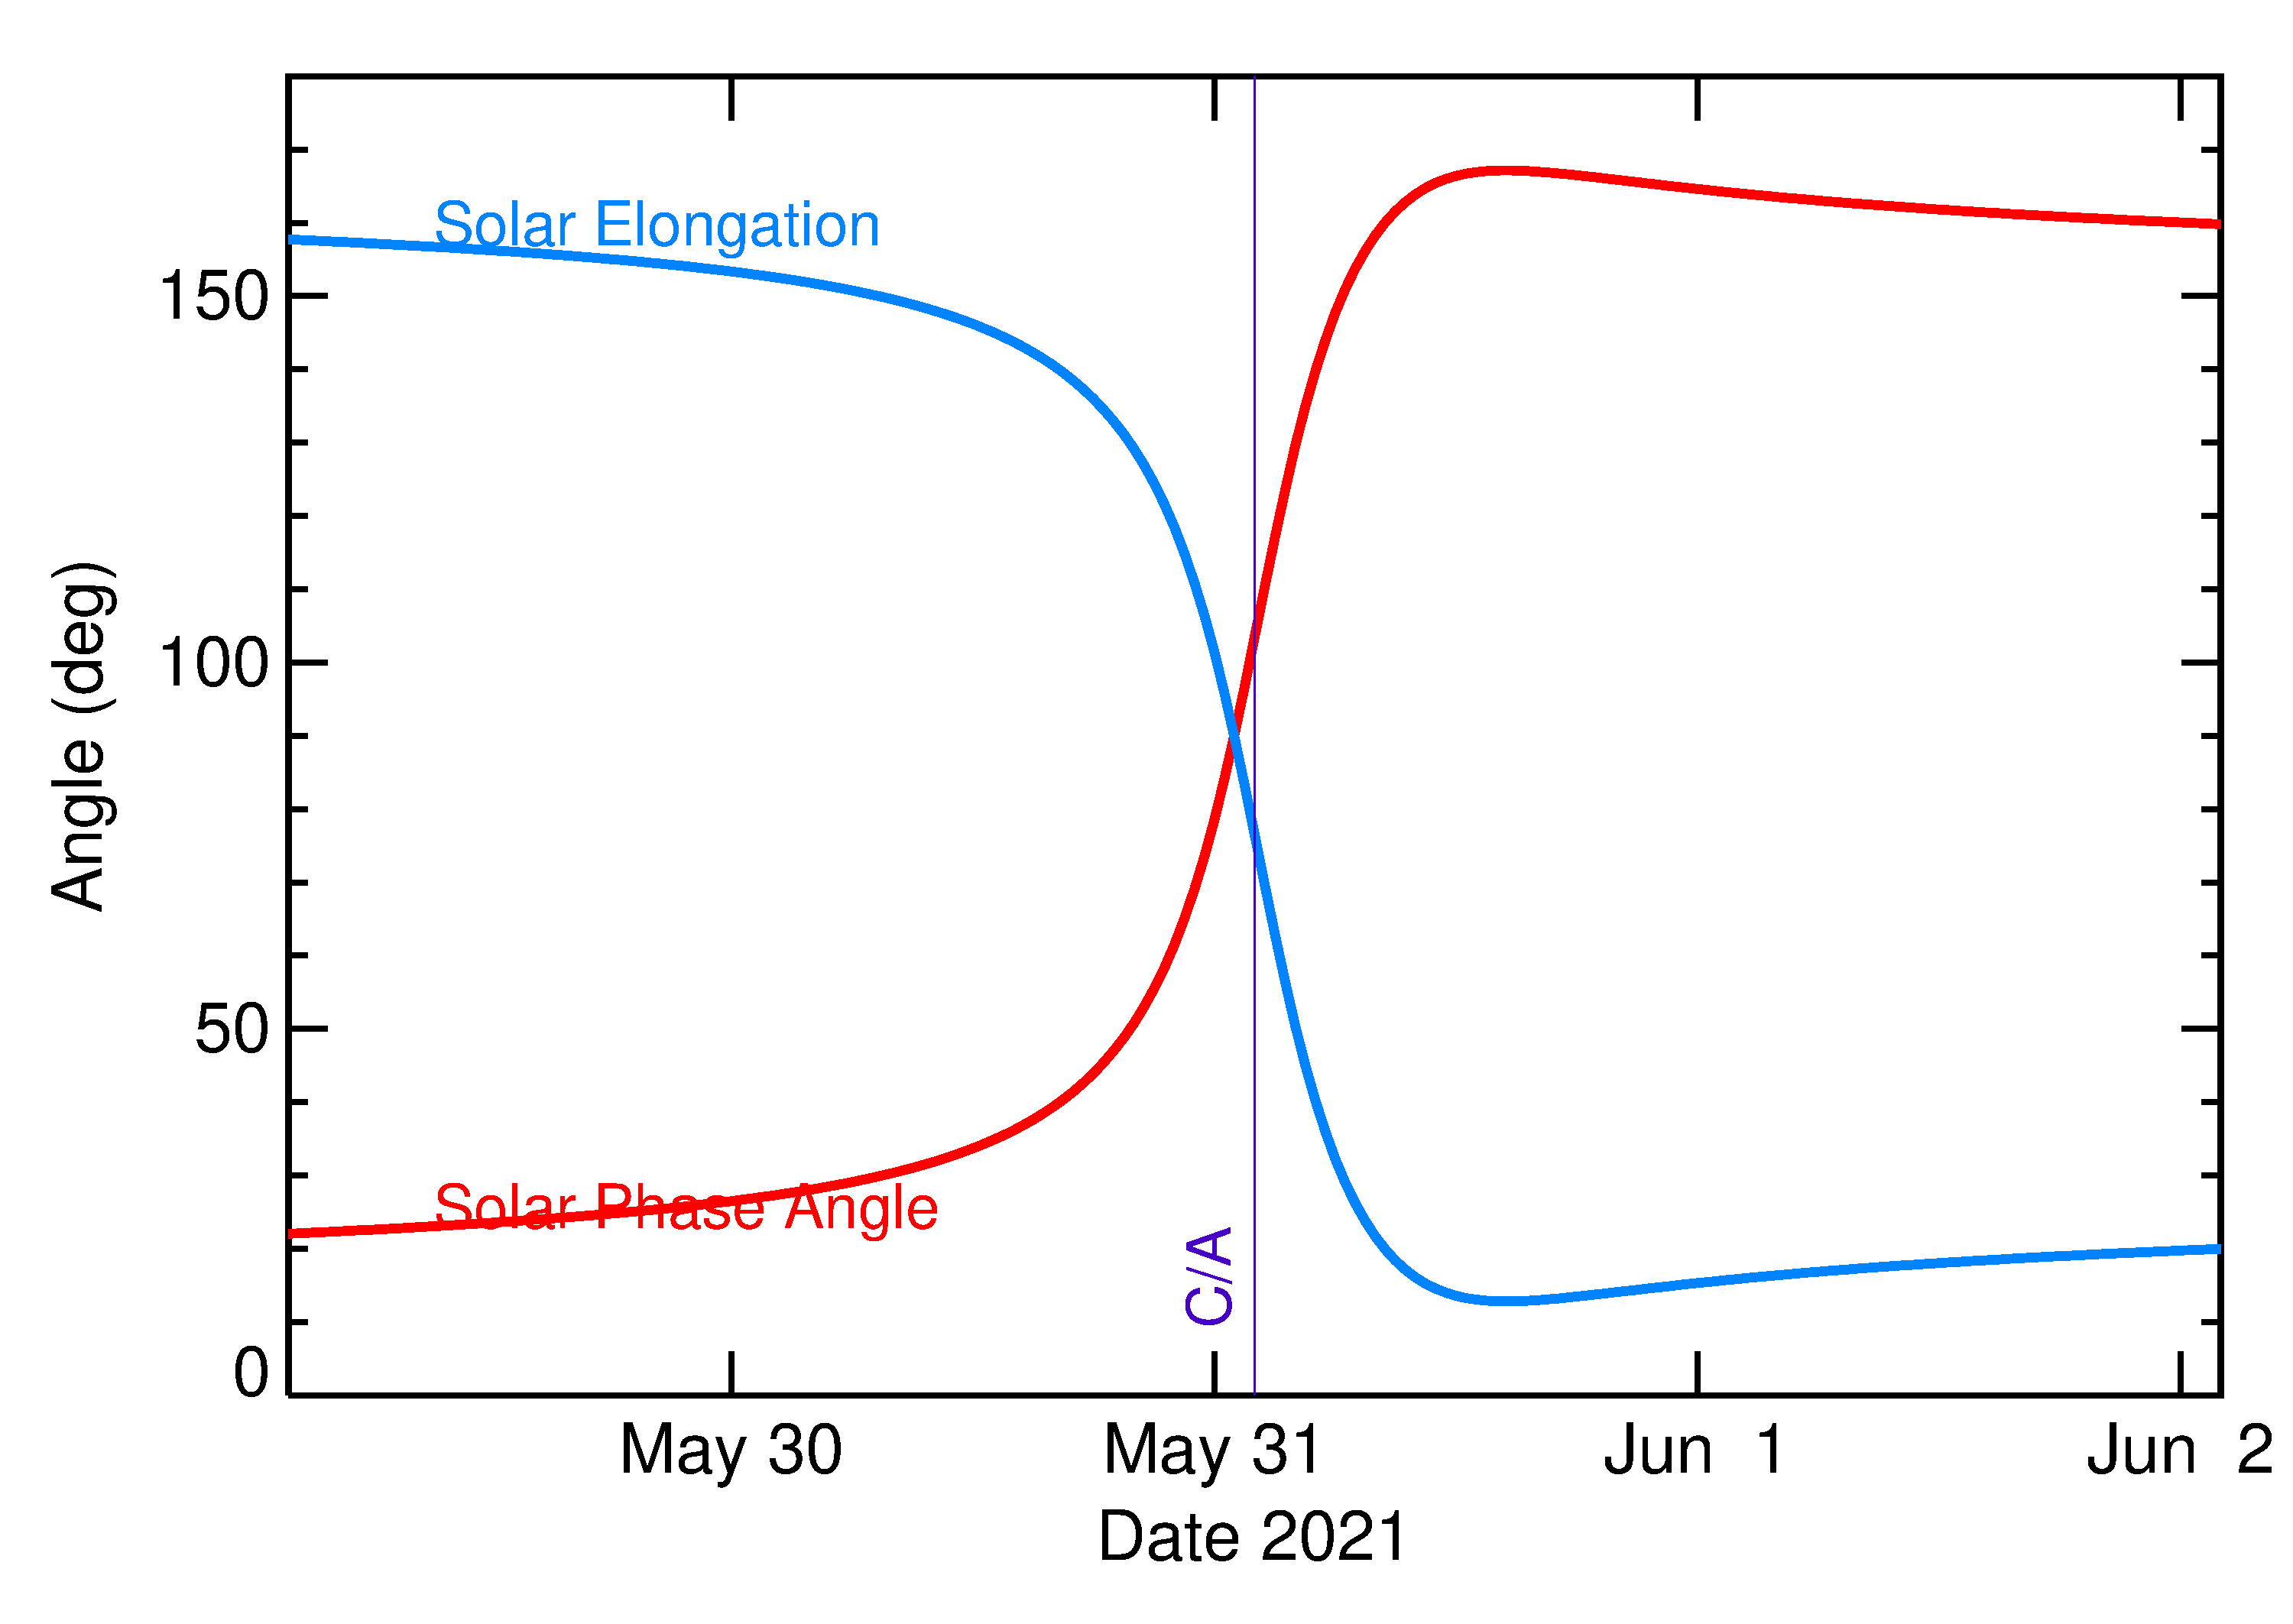 Solar Elongation and Solar Phase Angle of 2021 KN2 in the days around closest approach